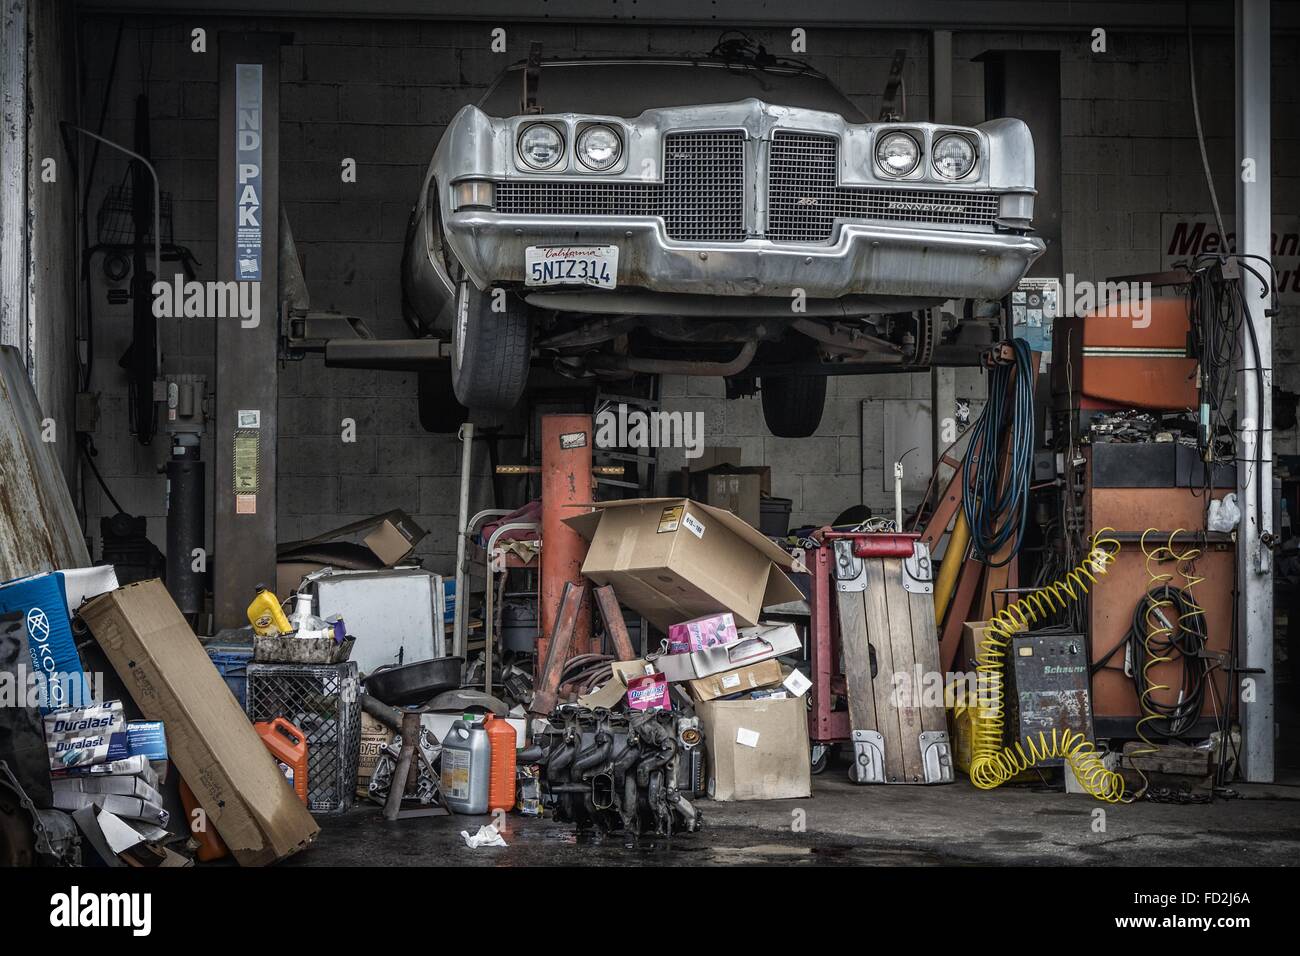 Jan. 30, 2015 - Los Angeles, California, U.S - A Pontiac Bonneville ages gracefully up on the rack at 4th Street and Boyle Avenue, where it's been for years. (Credit Image: © Fred Hoerr via ZUMA Wire) Stock Photo